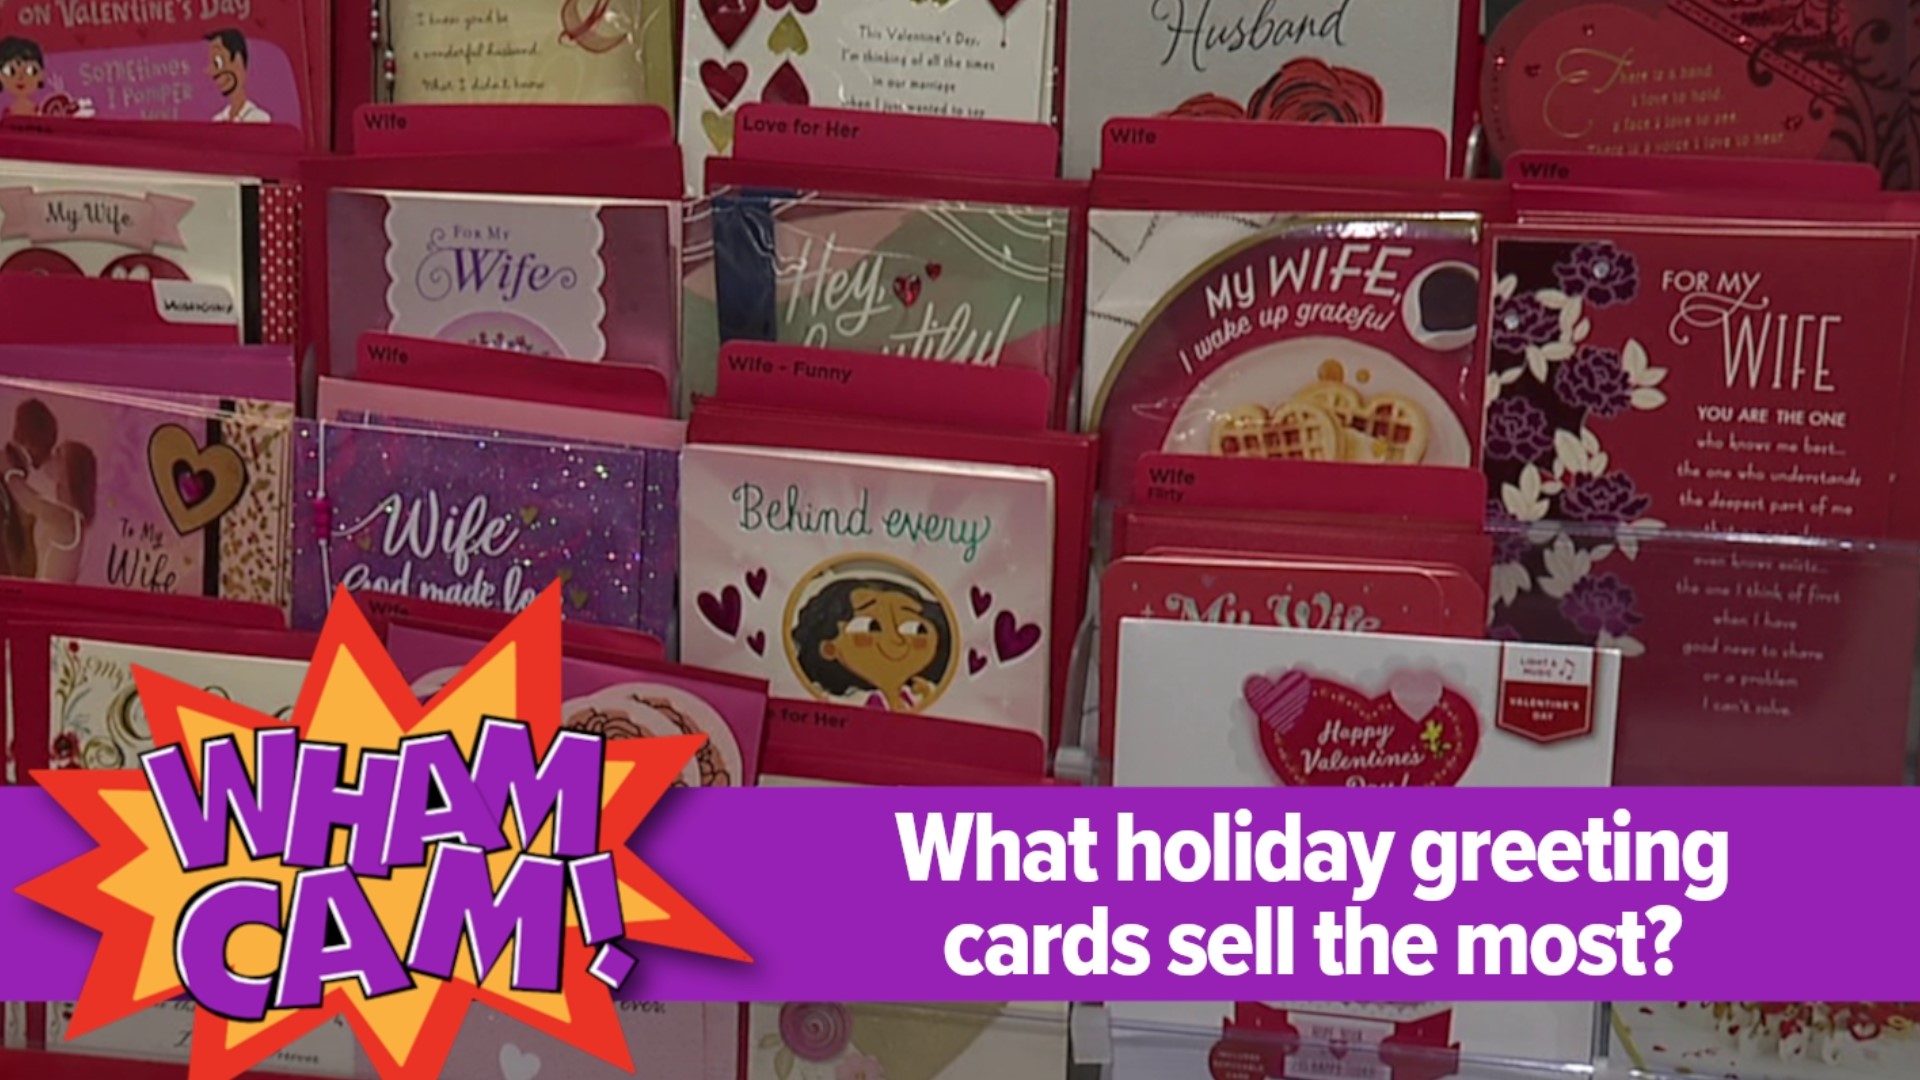 Valentine's Day will be here soon, and that has Joe wondering which holiday sells the most greeting cards. As always, Joe Snedeker has the answer in this Wham Cam.